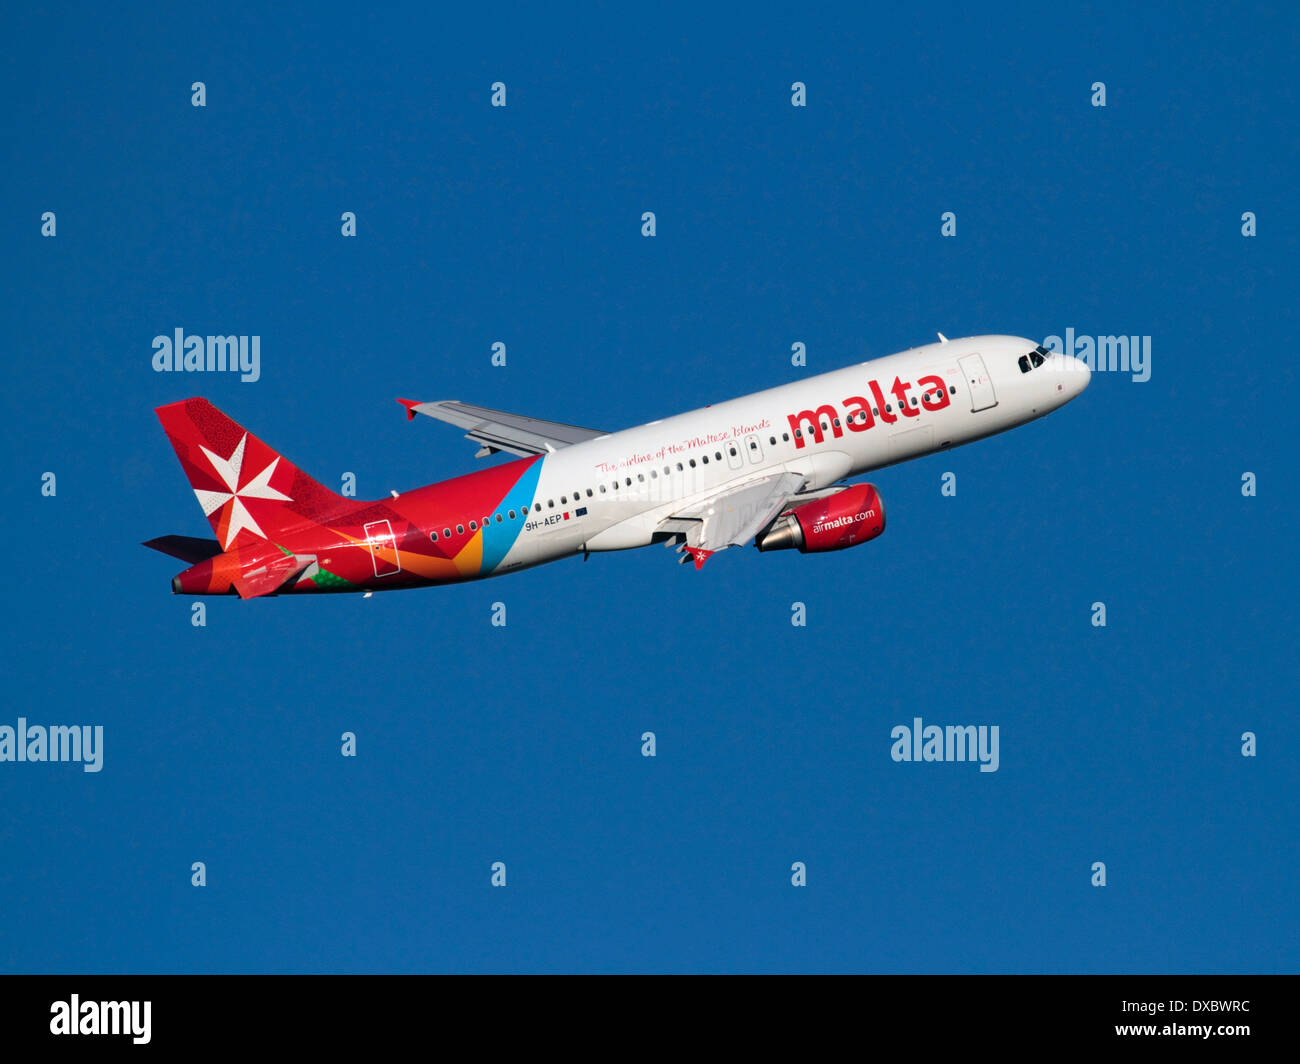 Air Malta Airbus A320 jet plane in flight on departure against a clear blue sky. Commercial flying and air travel. Stock Photo